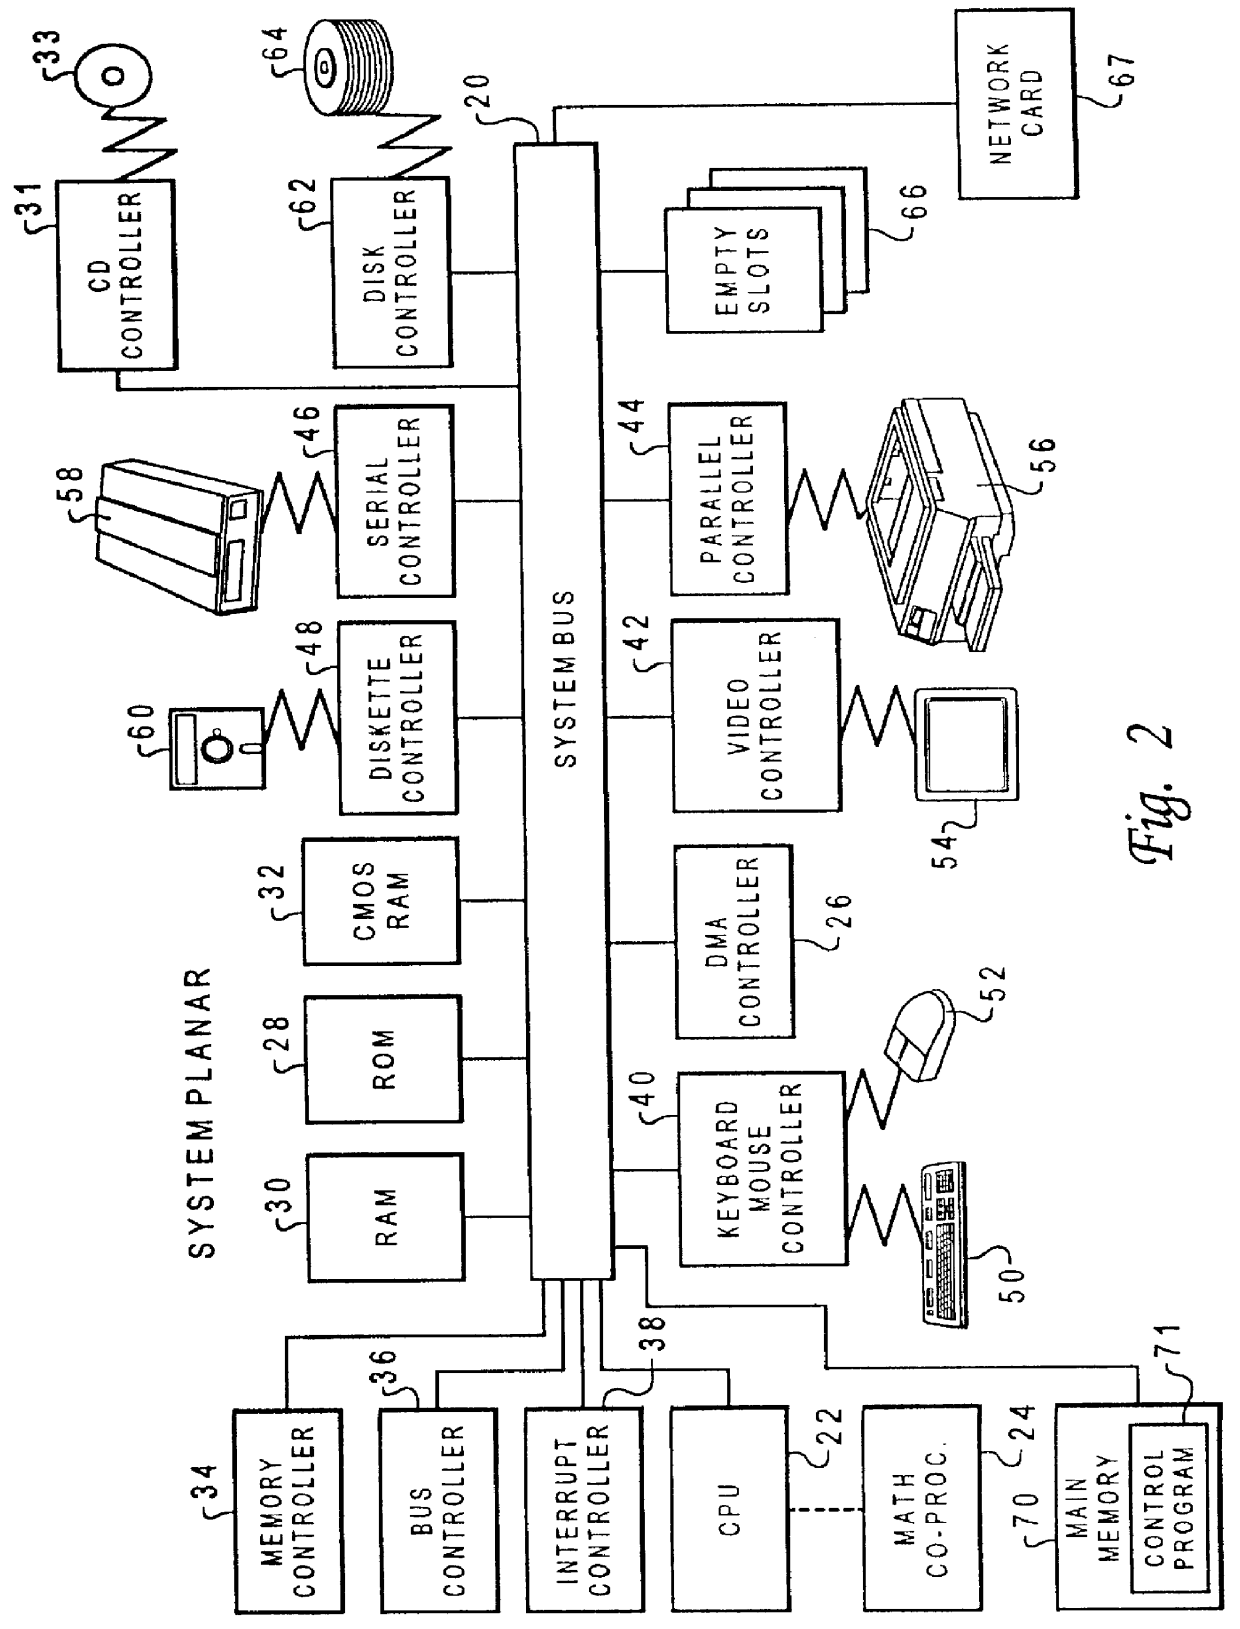 Method and system in a computer network for an intelligent search engine